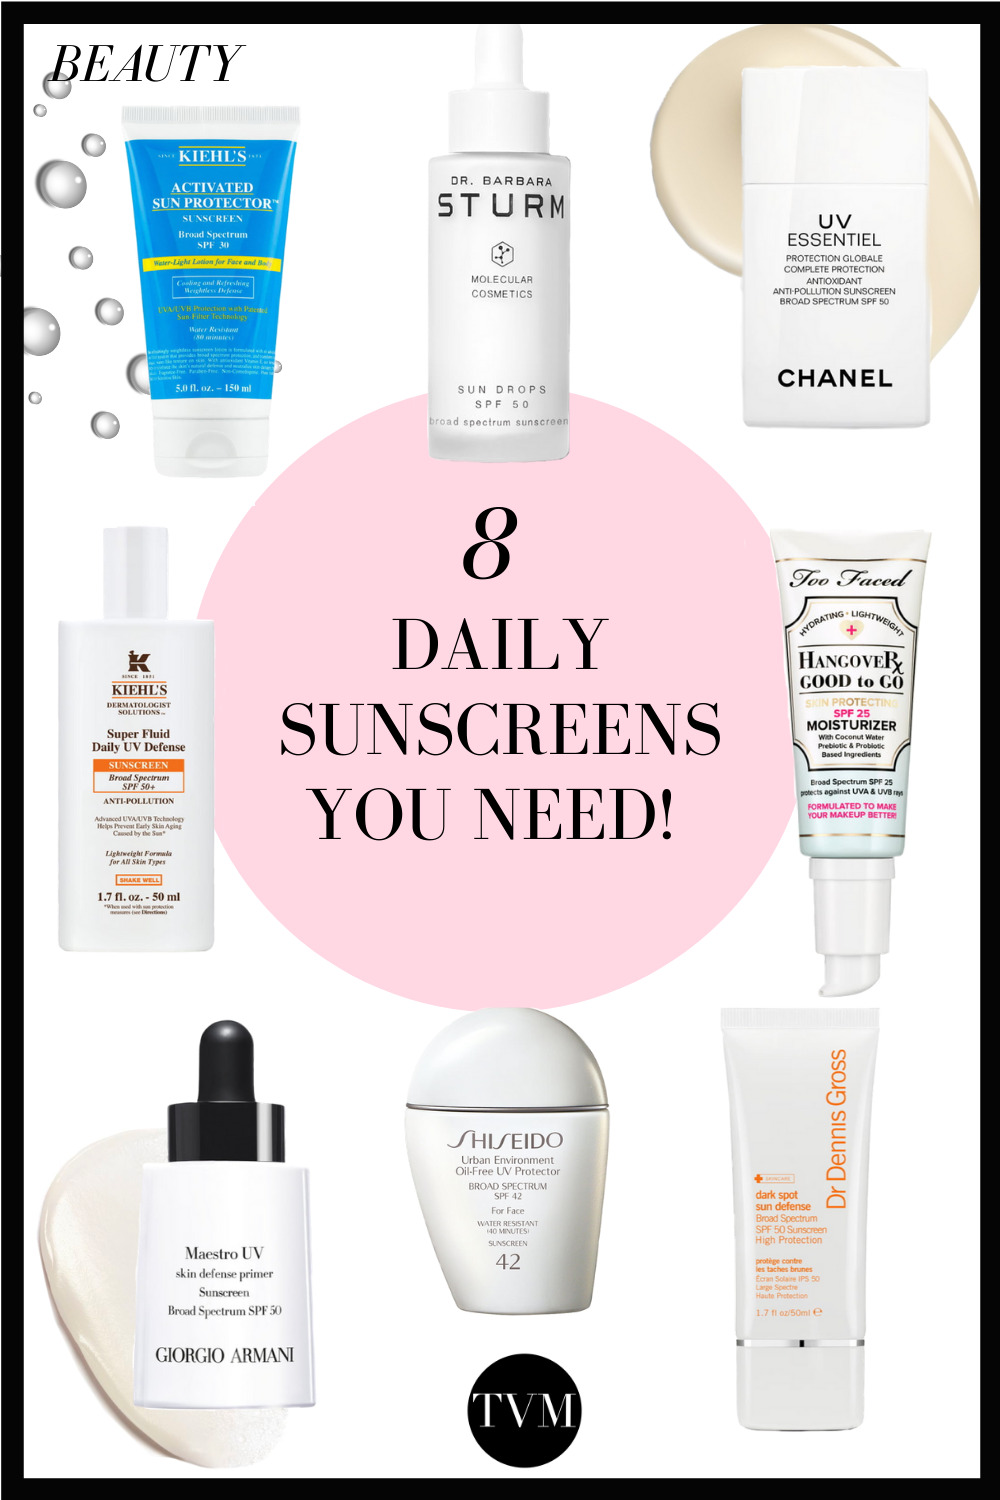 Sunscreen is super important! Do you know that you should use it all year? Here you will find 8 sunscreens to use daily and all year!